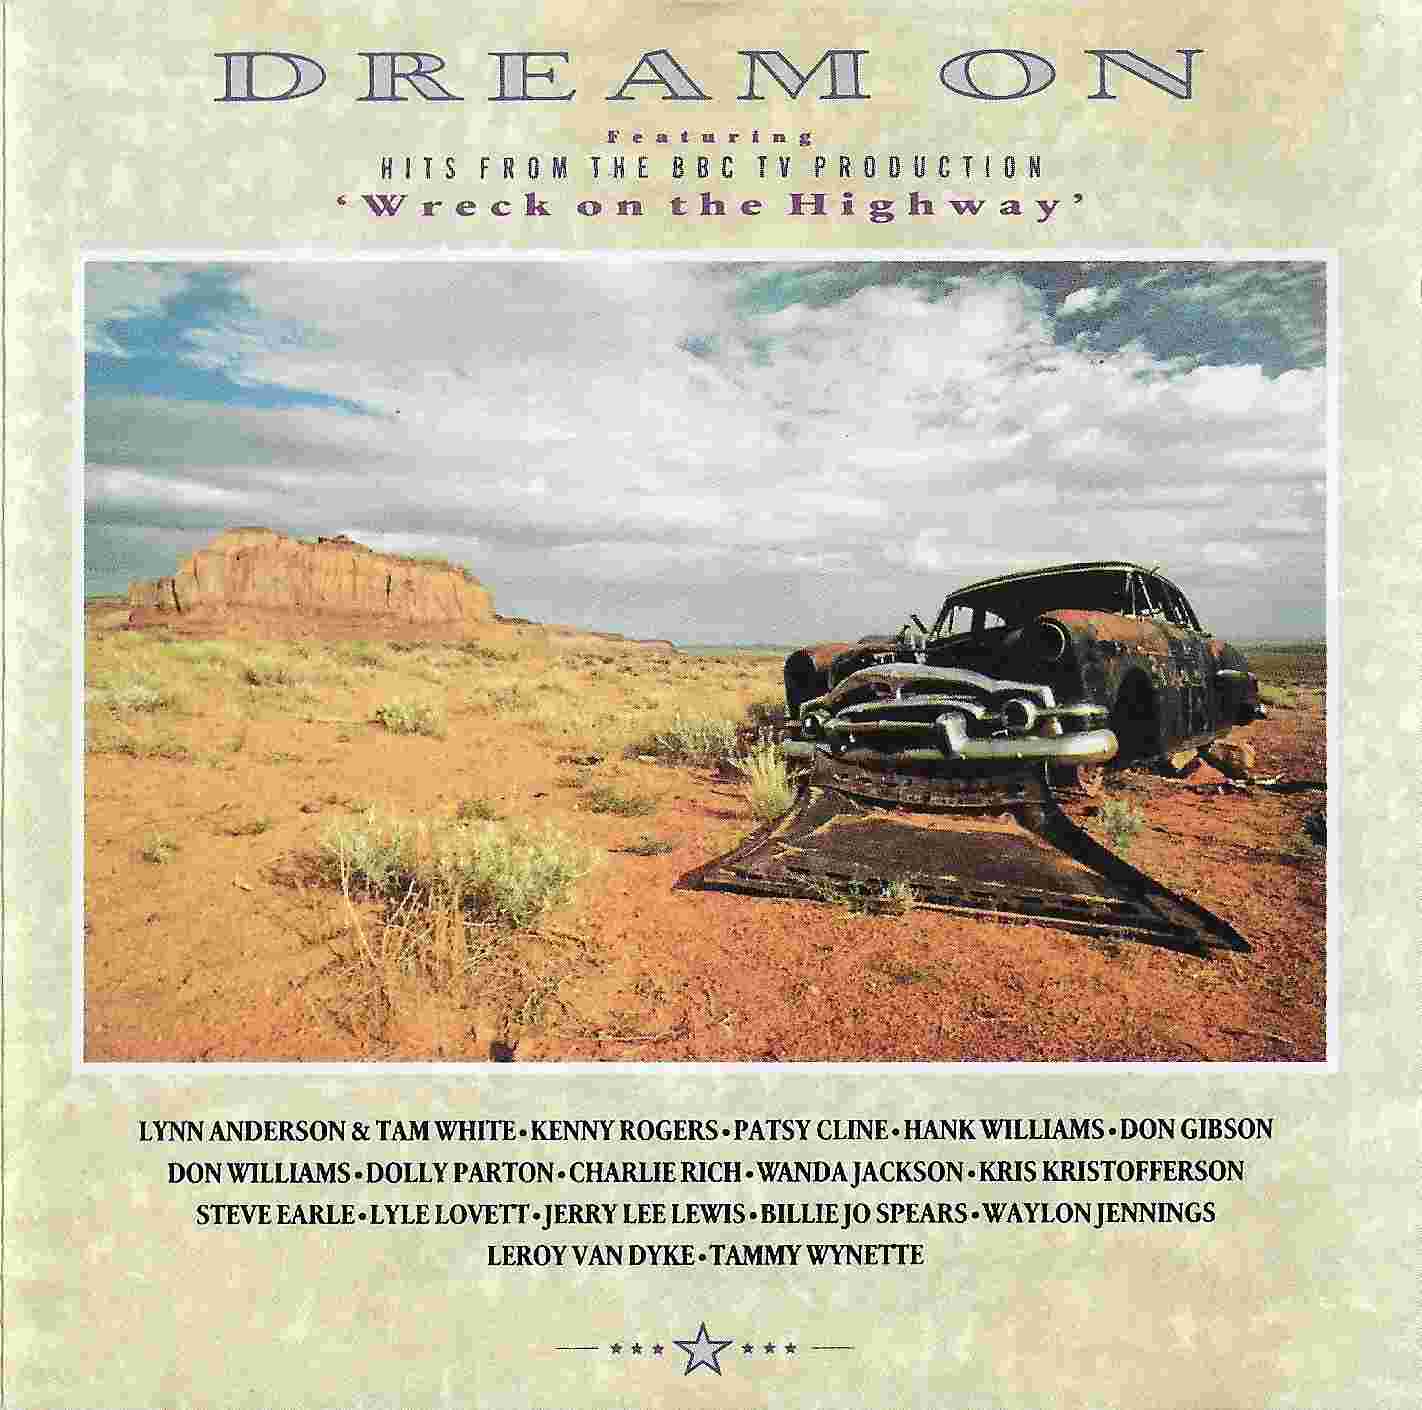 Picture of Dream on by artist Various from the BBC cds - Records and Tapes library